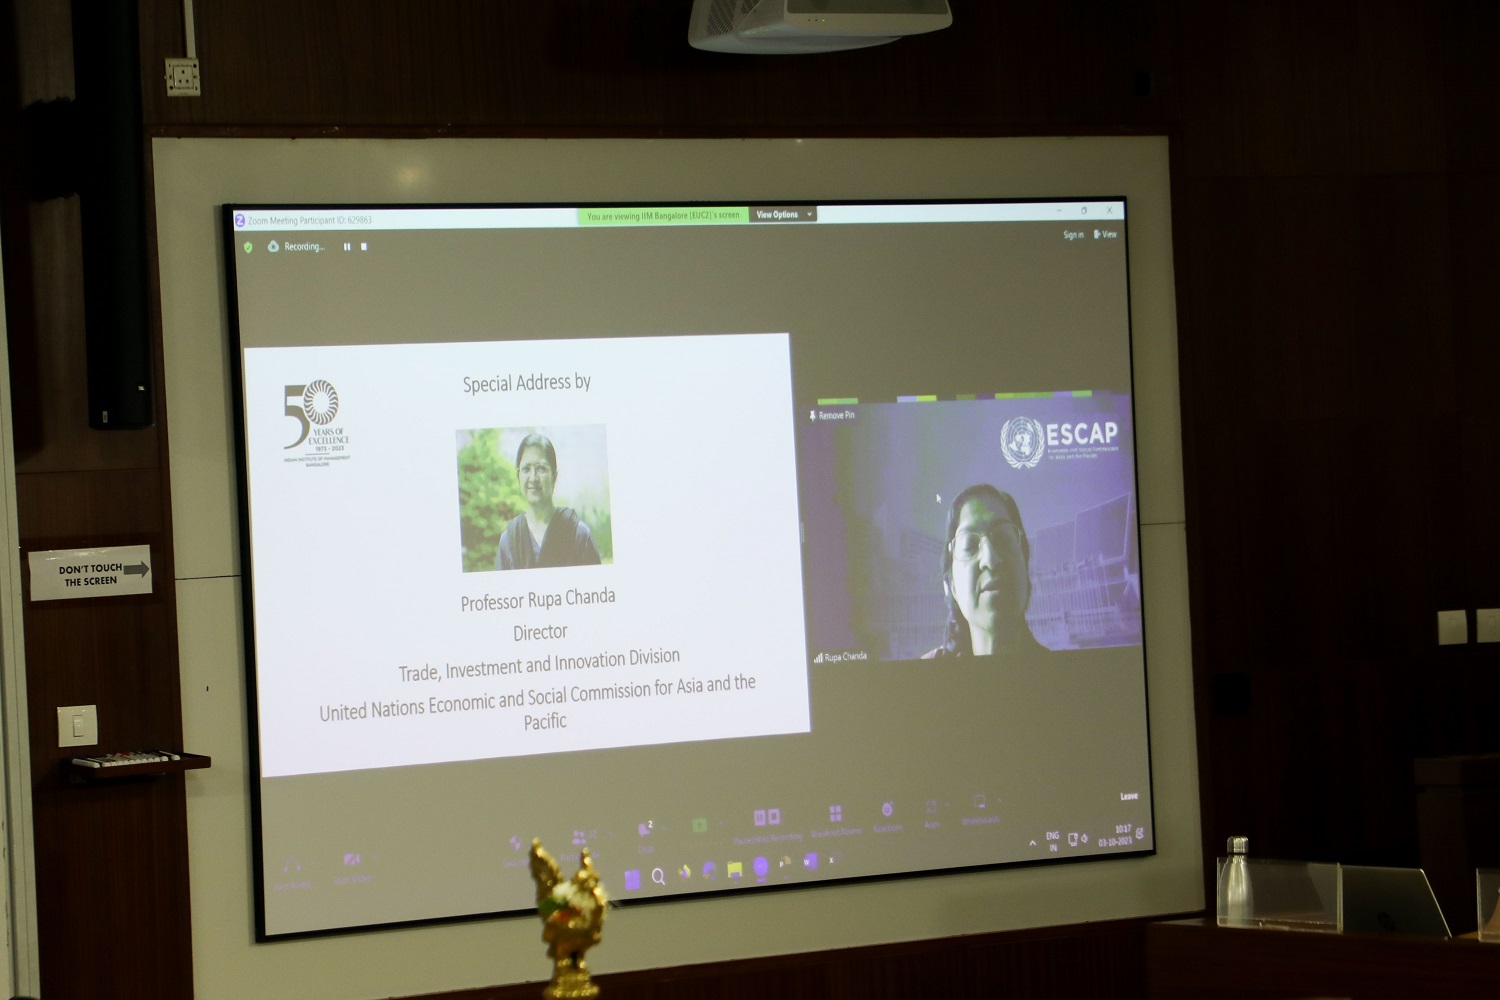 Prof. Rupa Chanda, Director, Trade, Investment and Innovation Division, United Nations Economic and Social Commission for Asia and the Pacific, delivers a special address virtually.